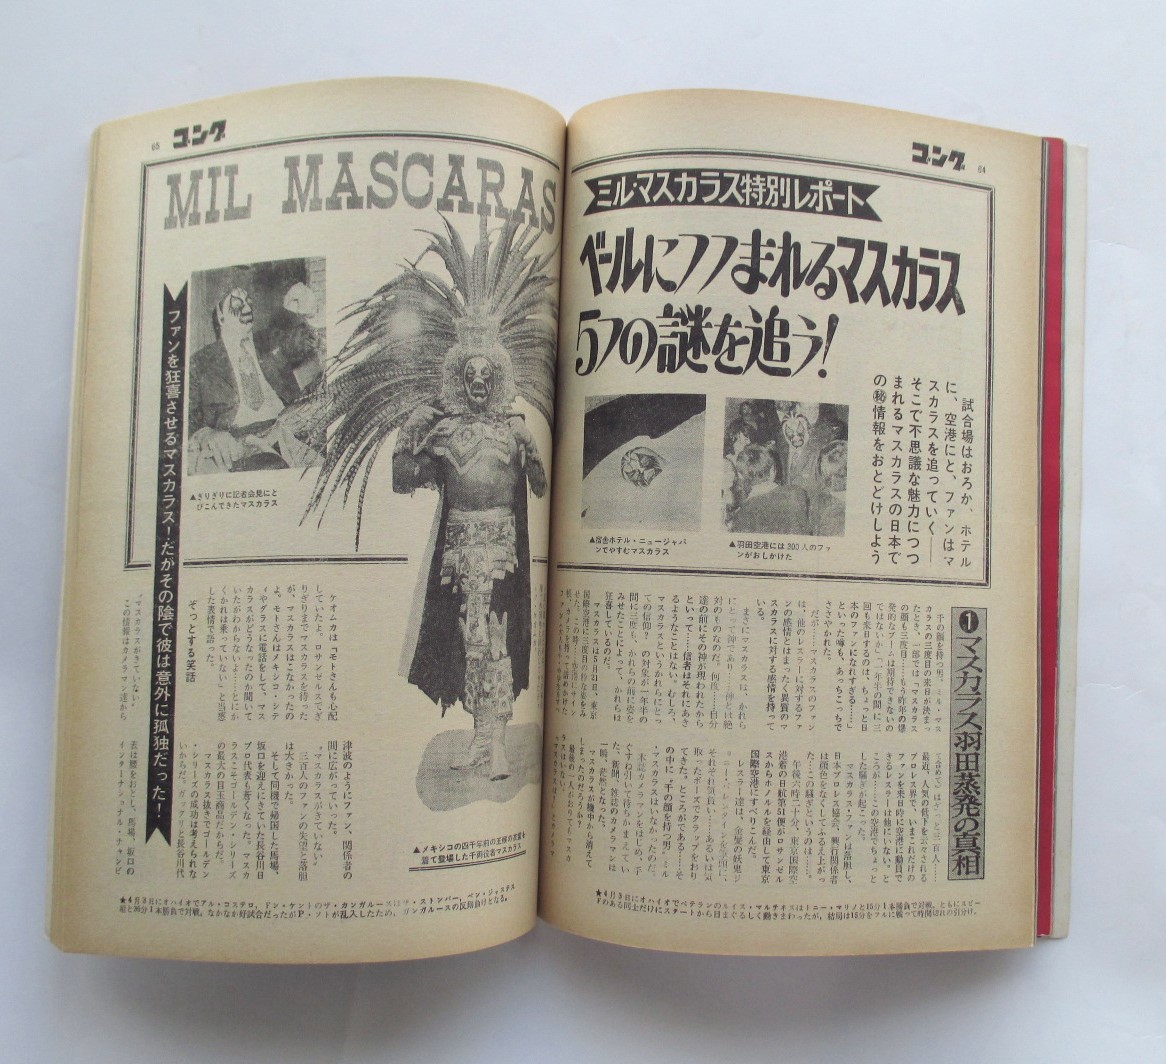  gong 1972 year separate volume 7 month number mascara s special collection large pin nap(45x62cm) attaching Showa era 47 year 7 month 15 day issue 